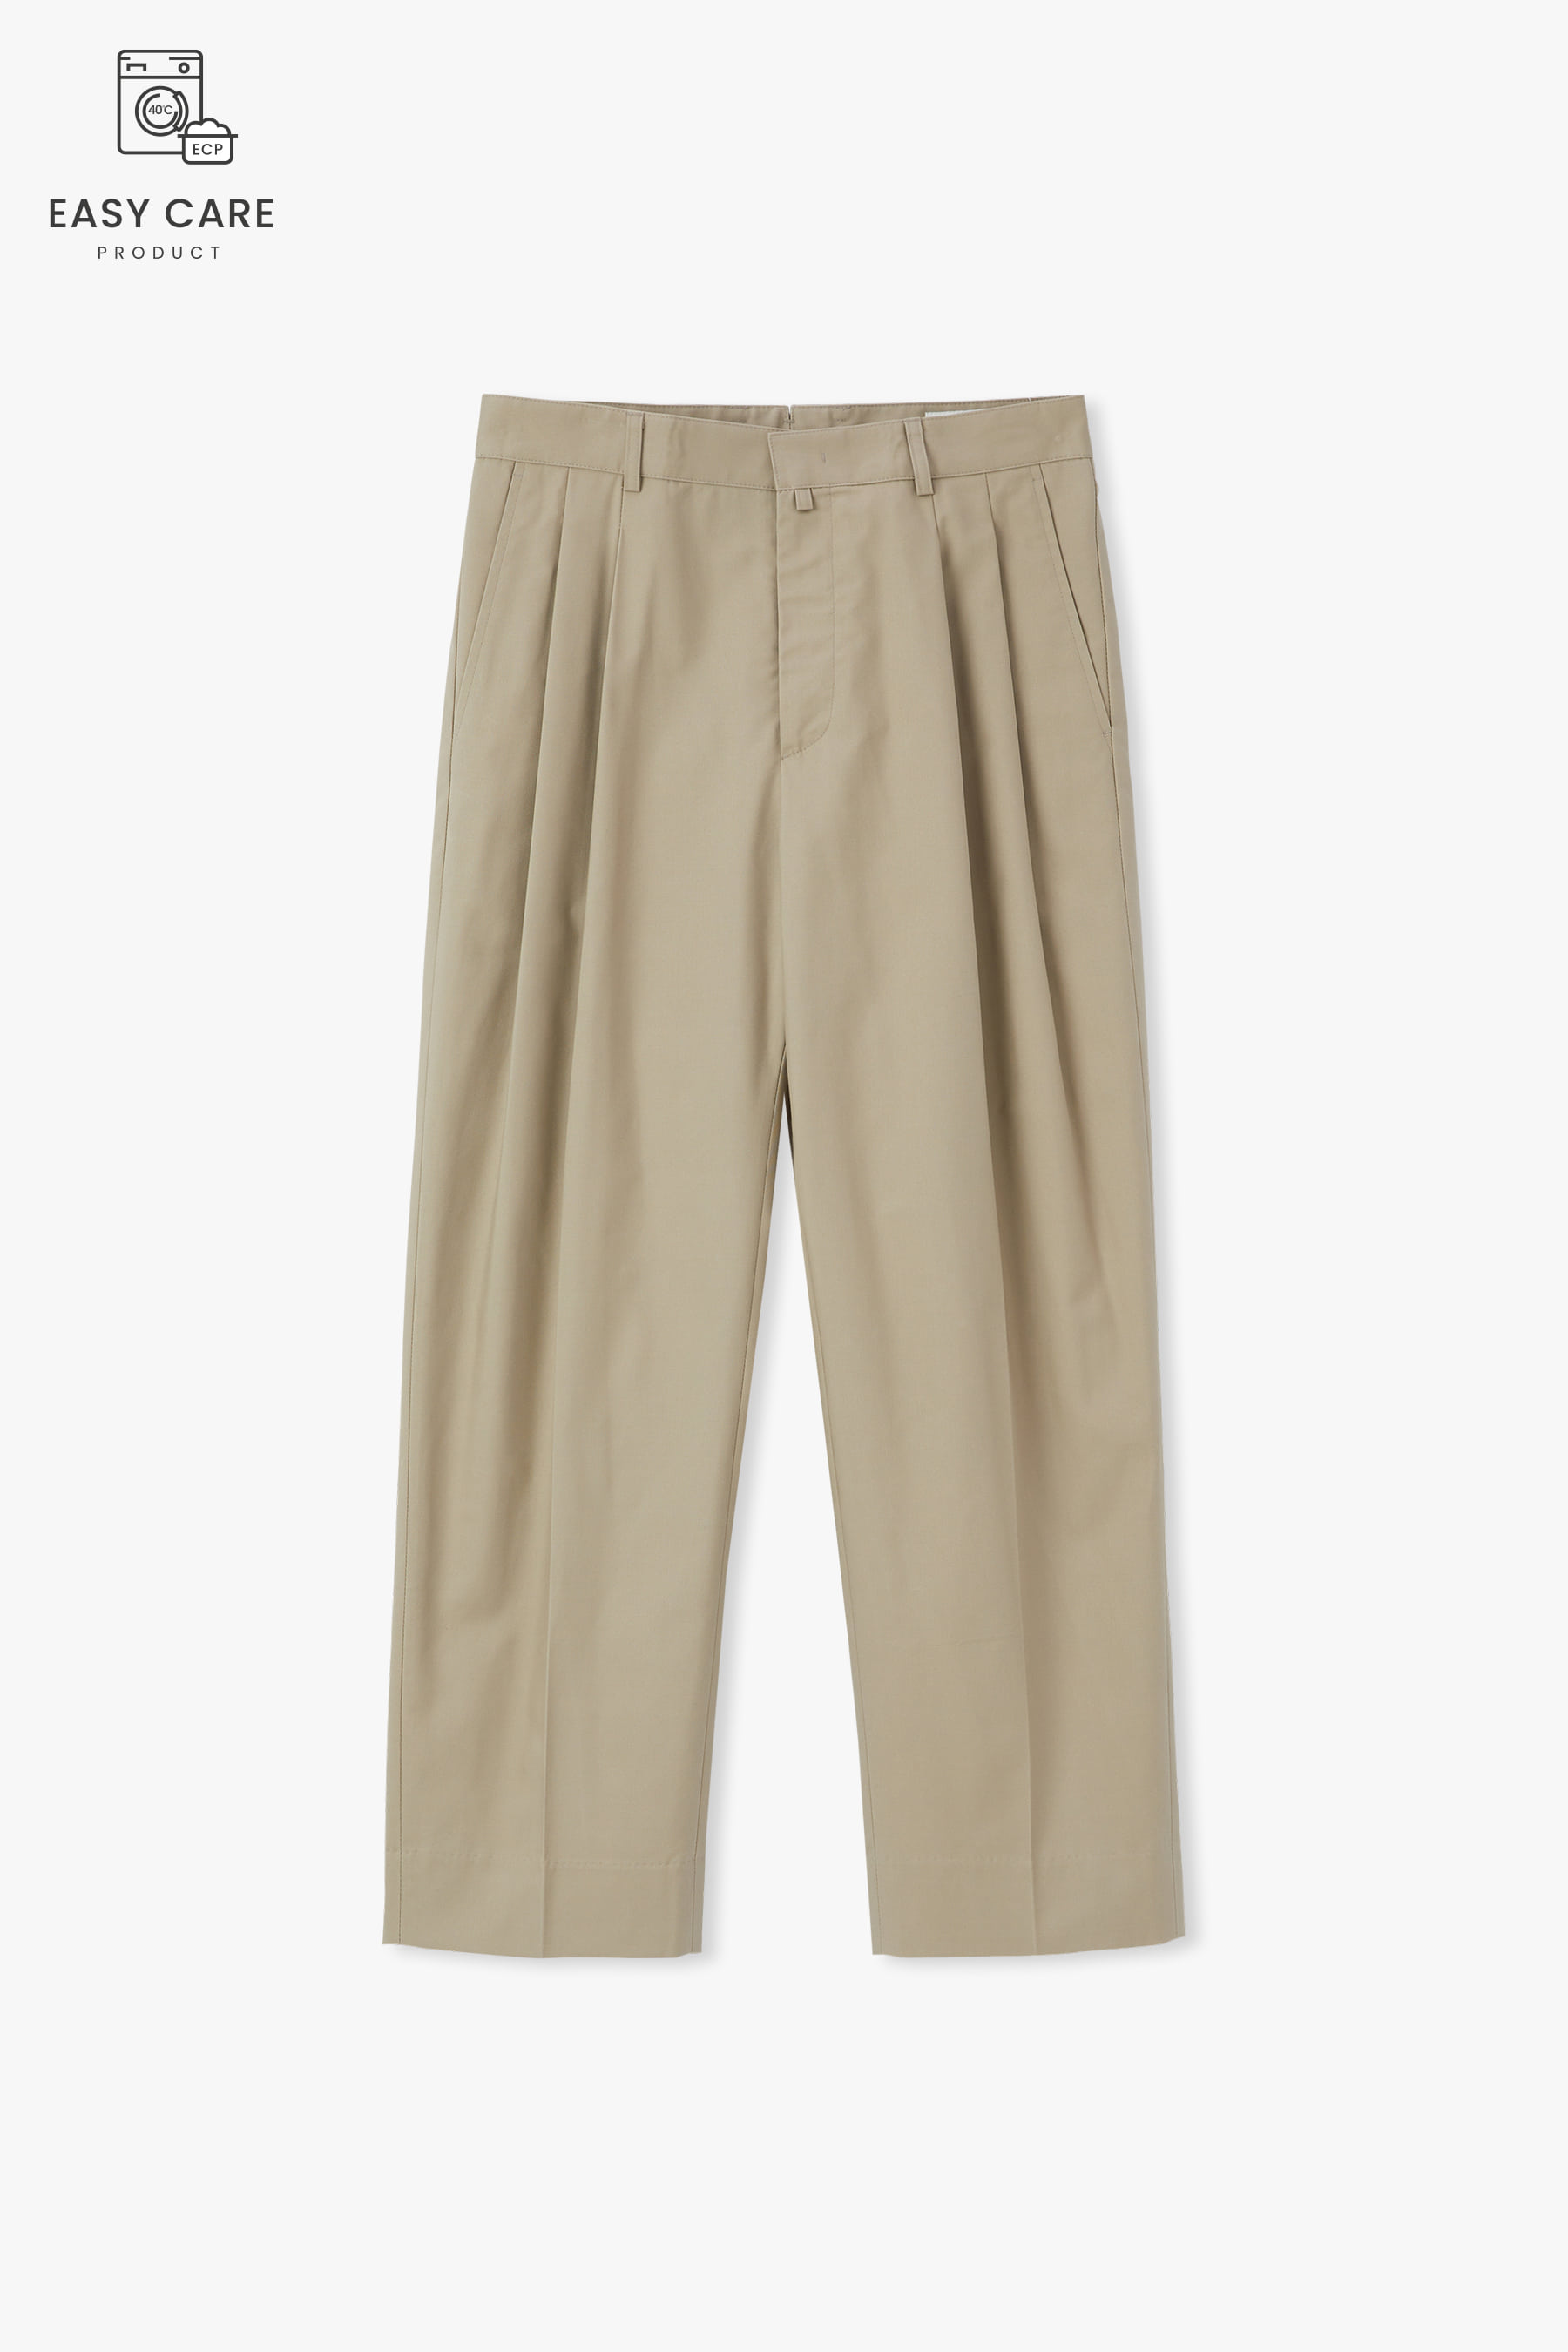 OYSTER R-802 TWO TUCK TAPERED COTTON DRILL CHINO PANTS (ECP GARMENT PROCESS ONLY MACHINE)